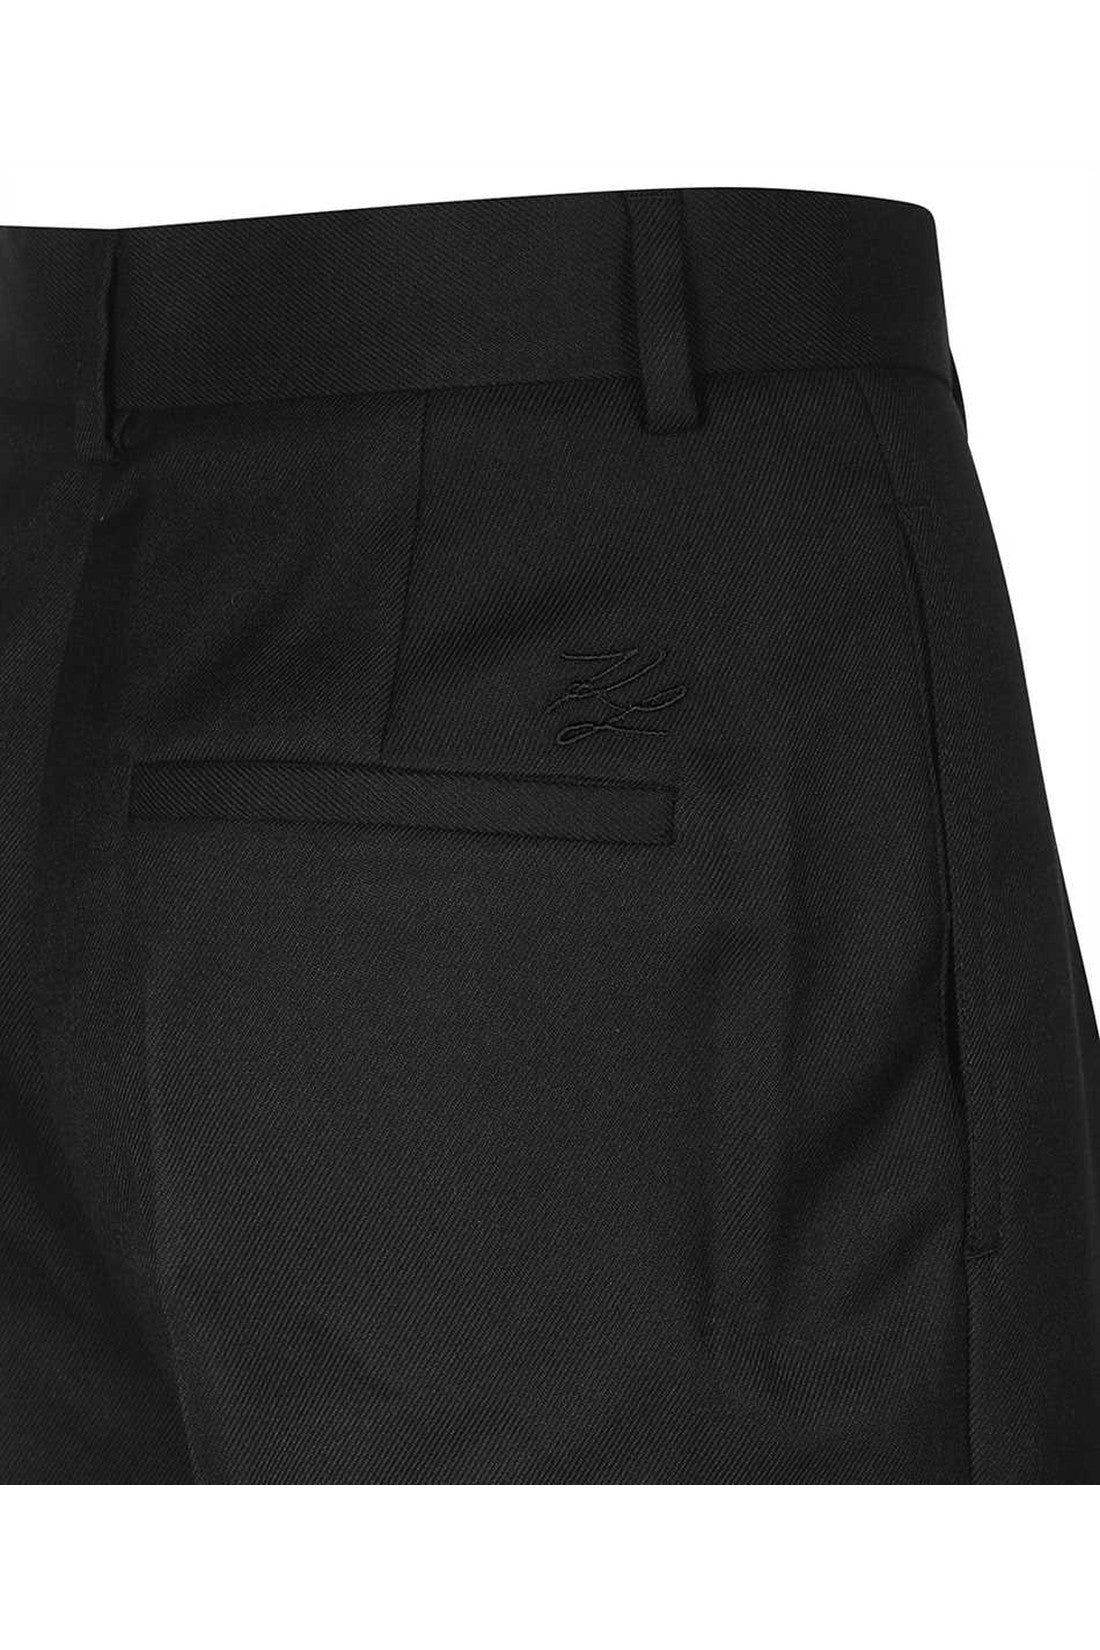 Straight-leg trousers-Karl Lagerfeld-OUTLET-SALE-ARCHIVIST